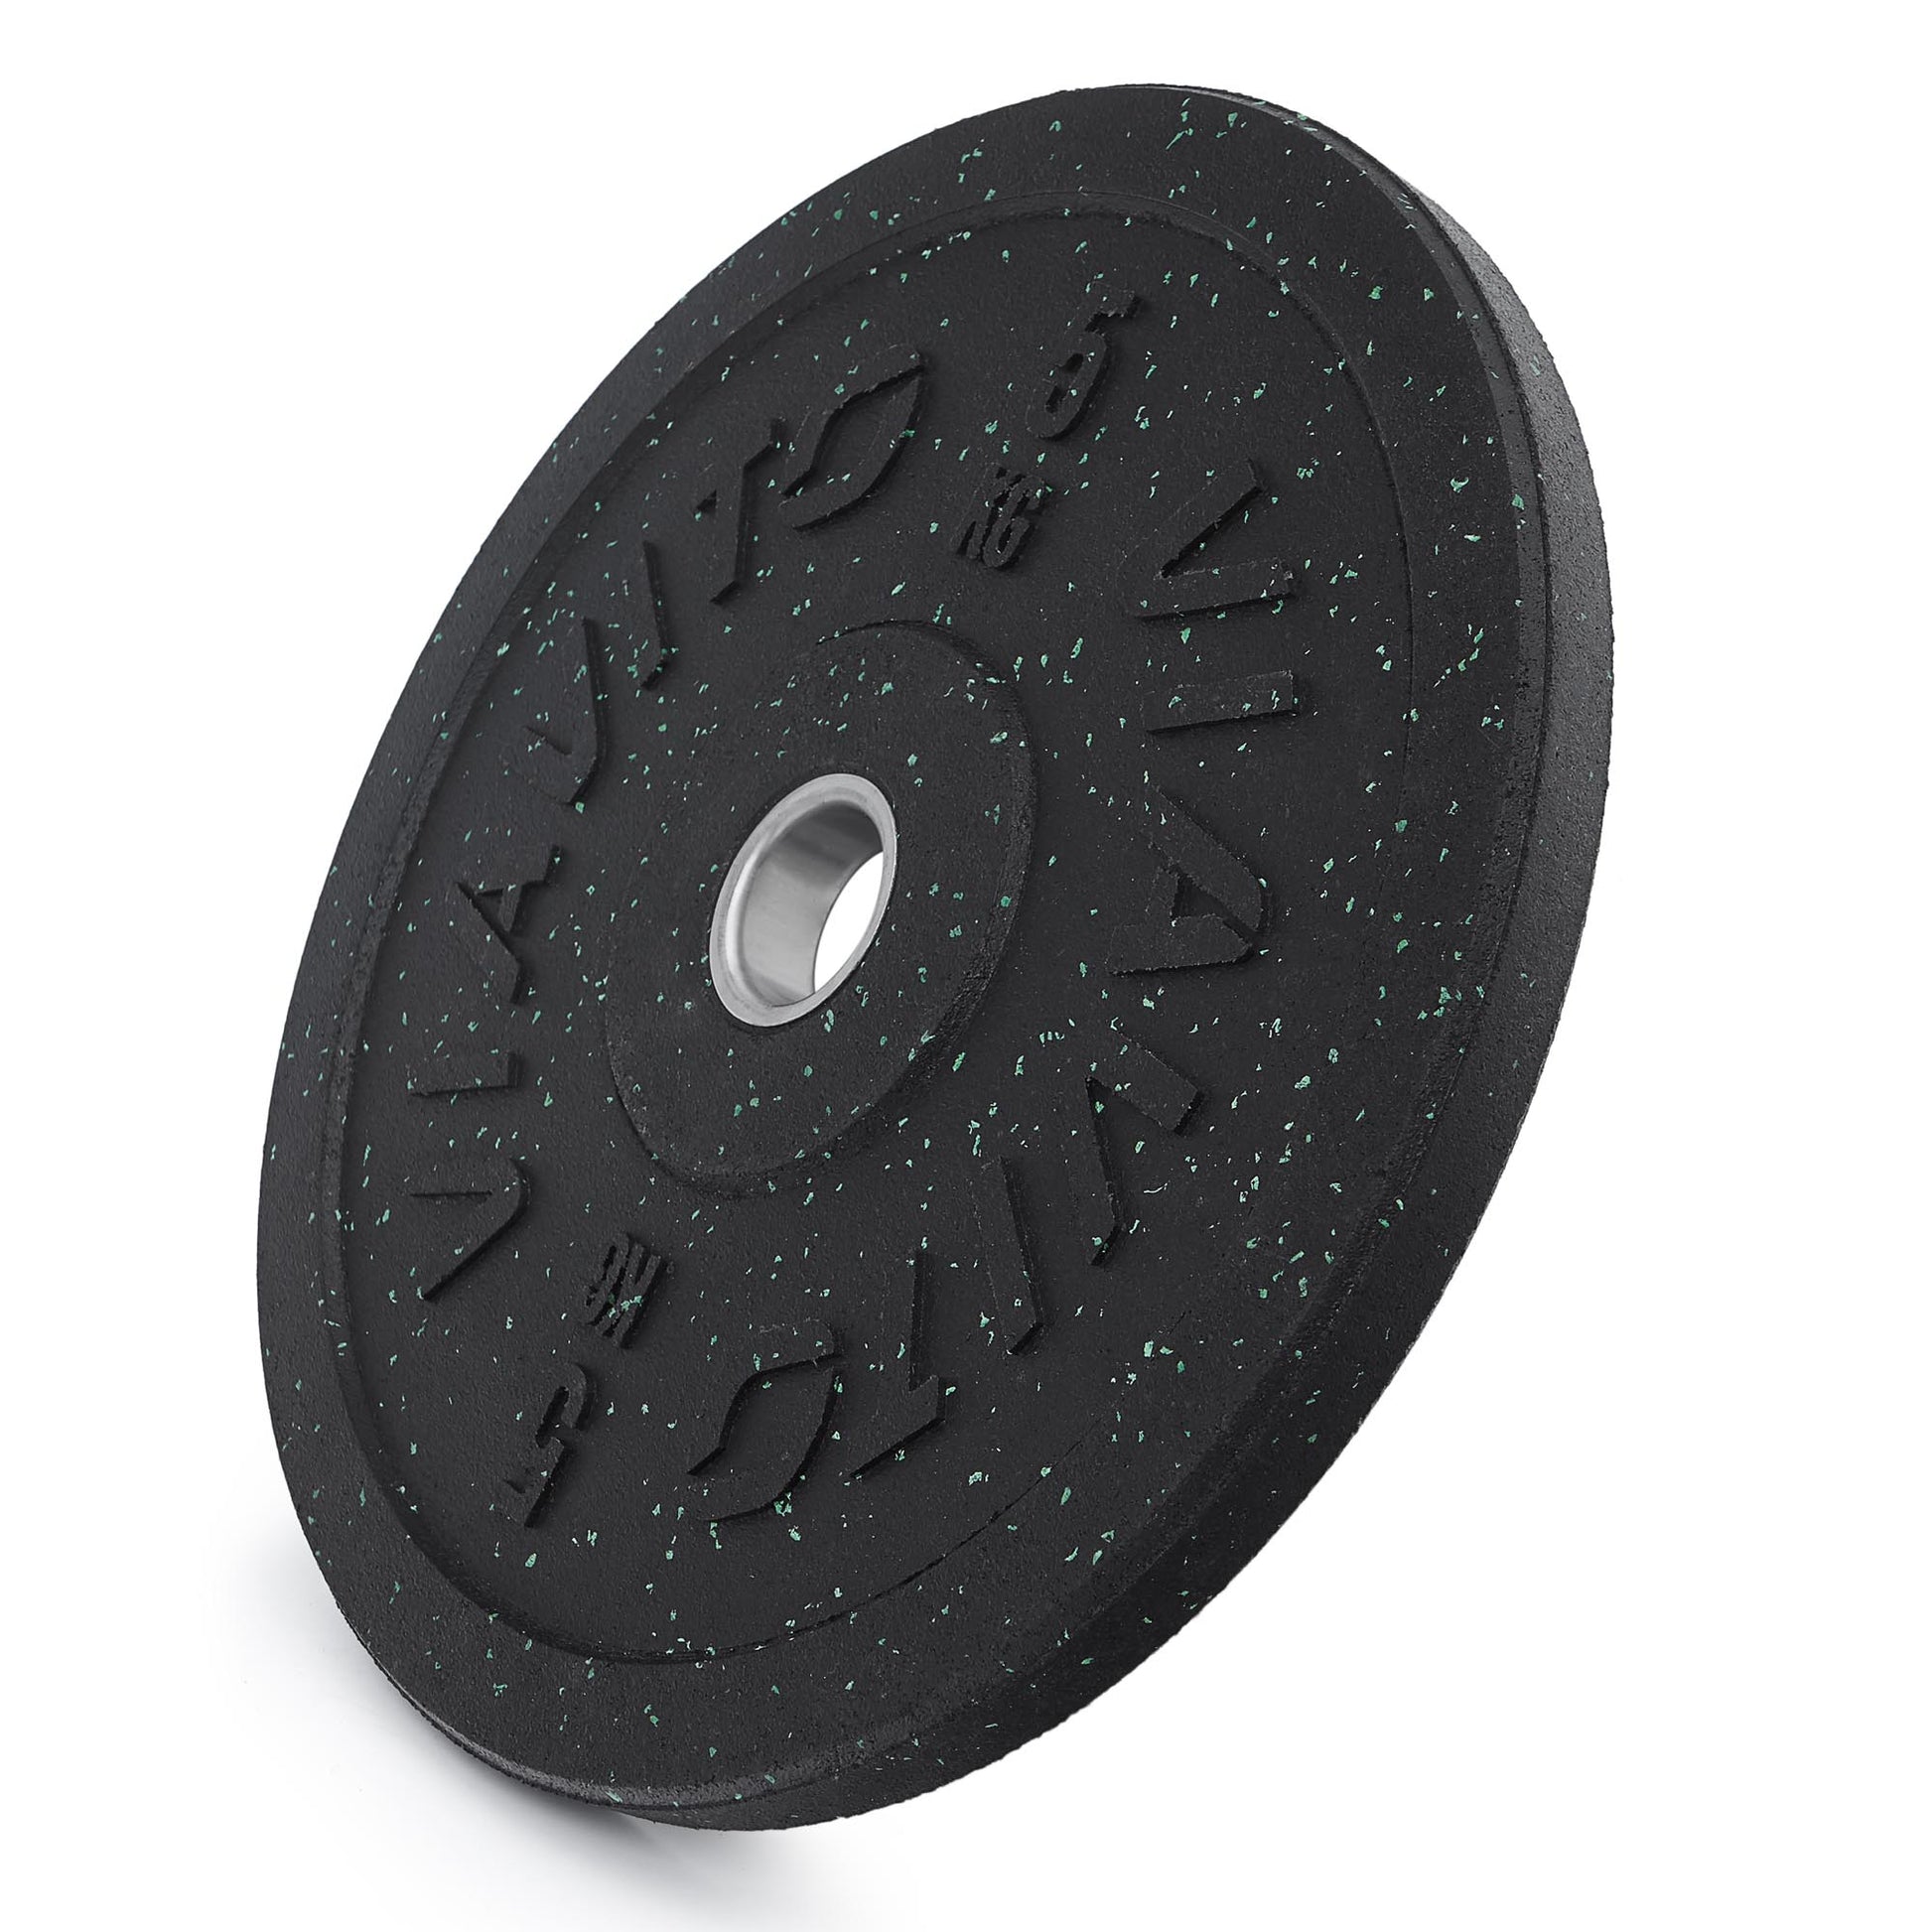 |Viavito Rubber Crumb Bumper Olympic 110kg Weight Plates Set - 5kg|